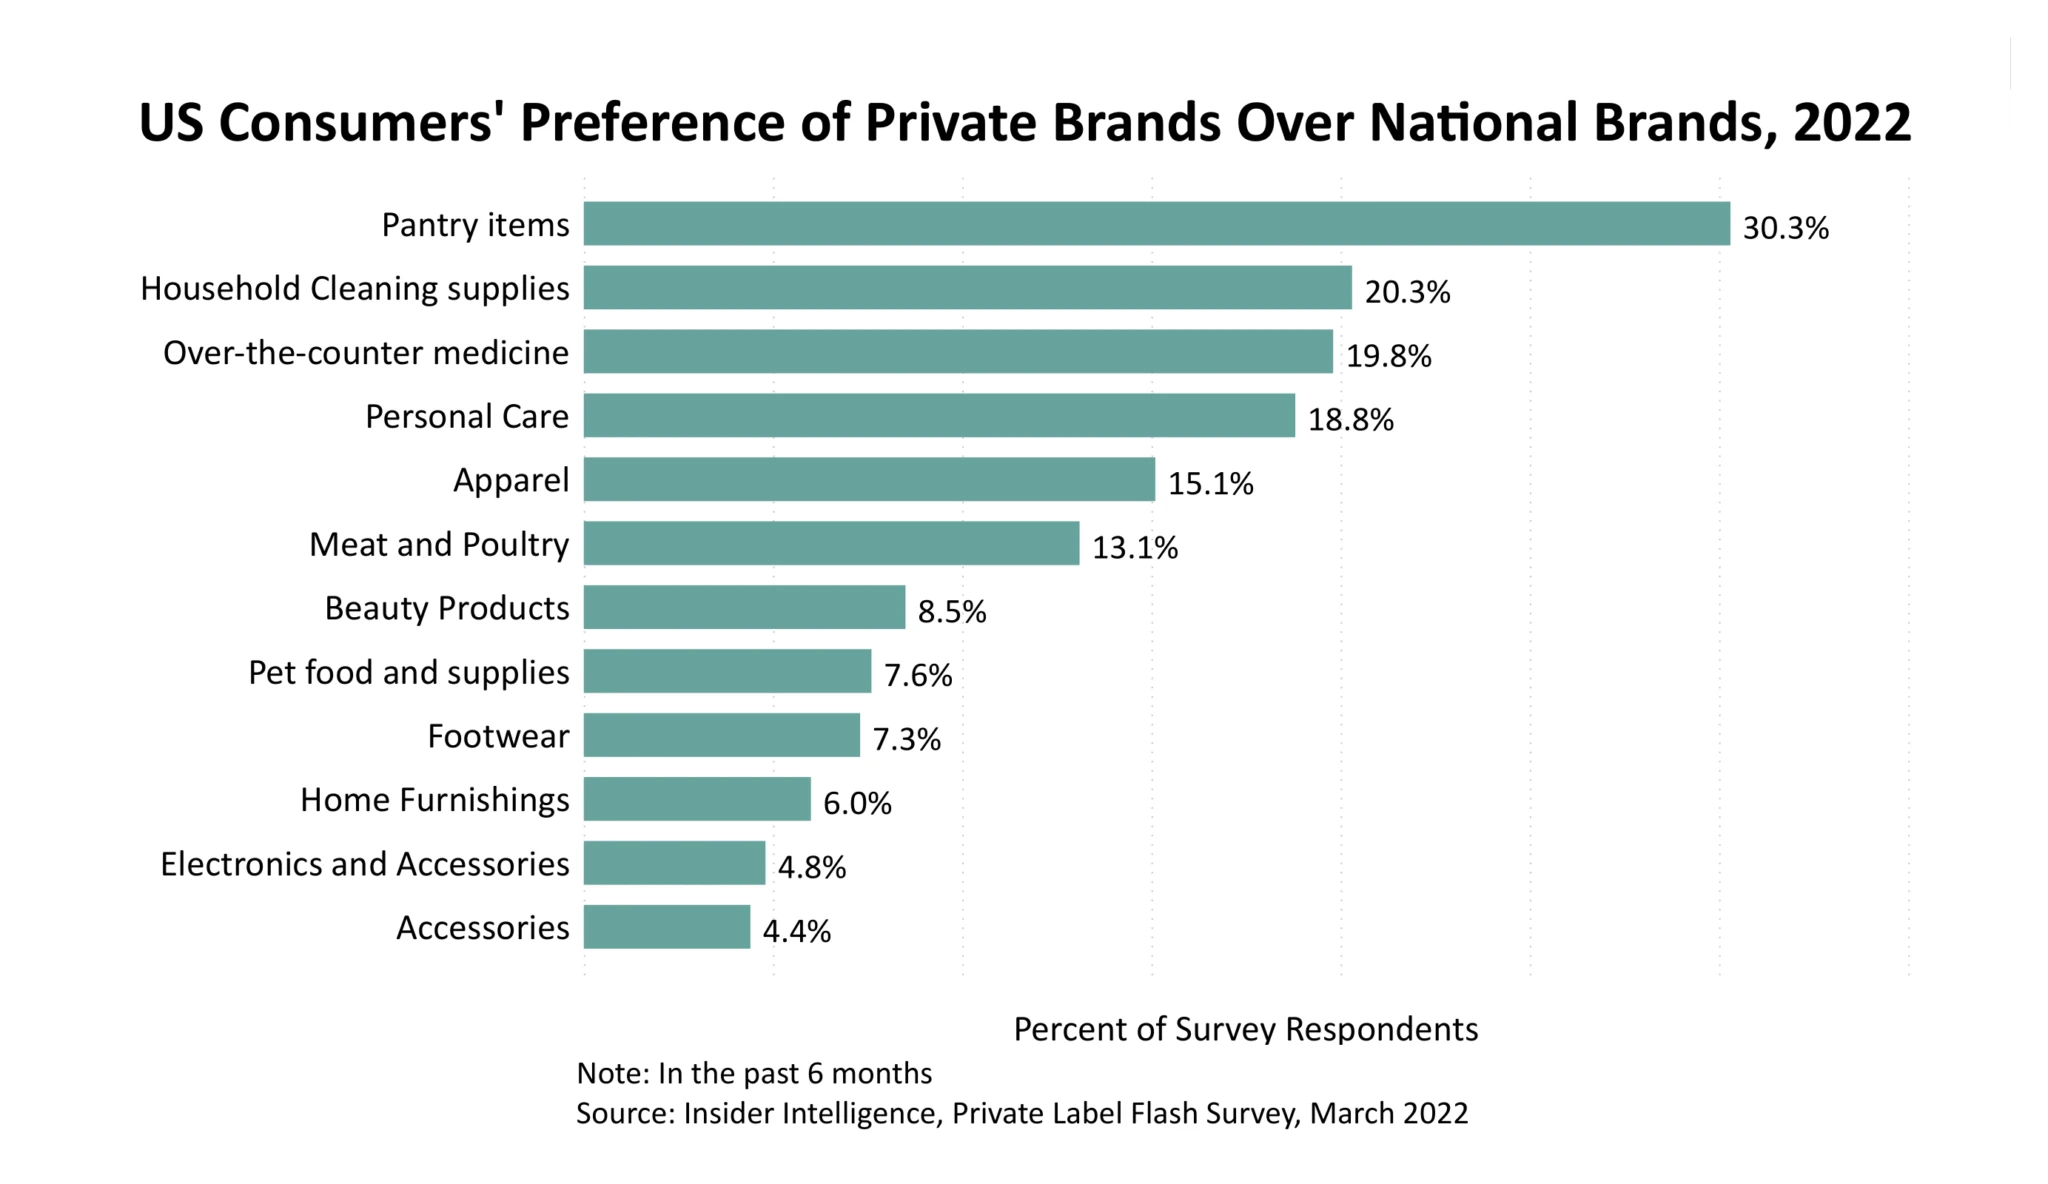 US consumers' preference for private brands over national brands, 2022